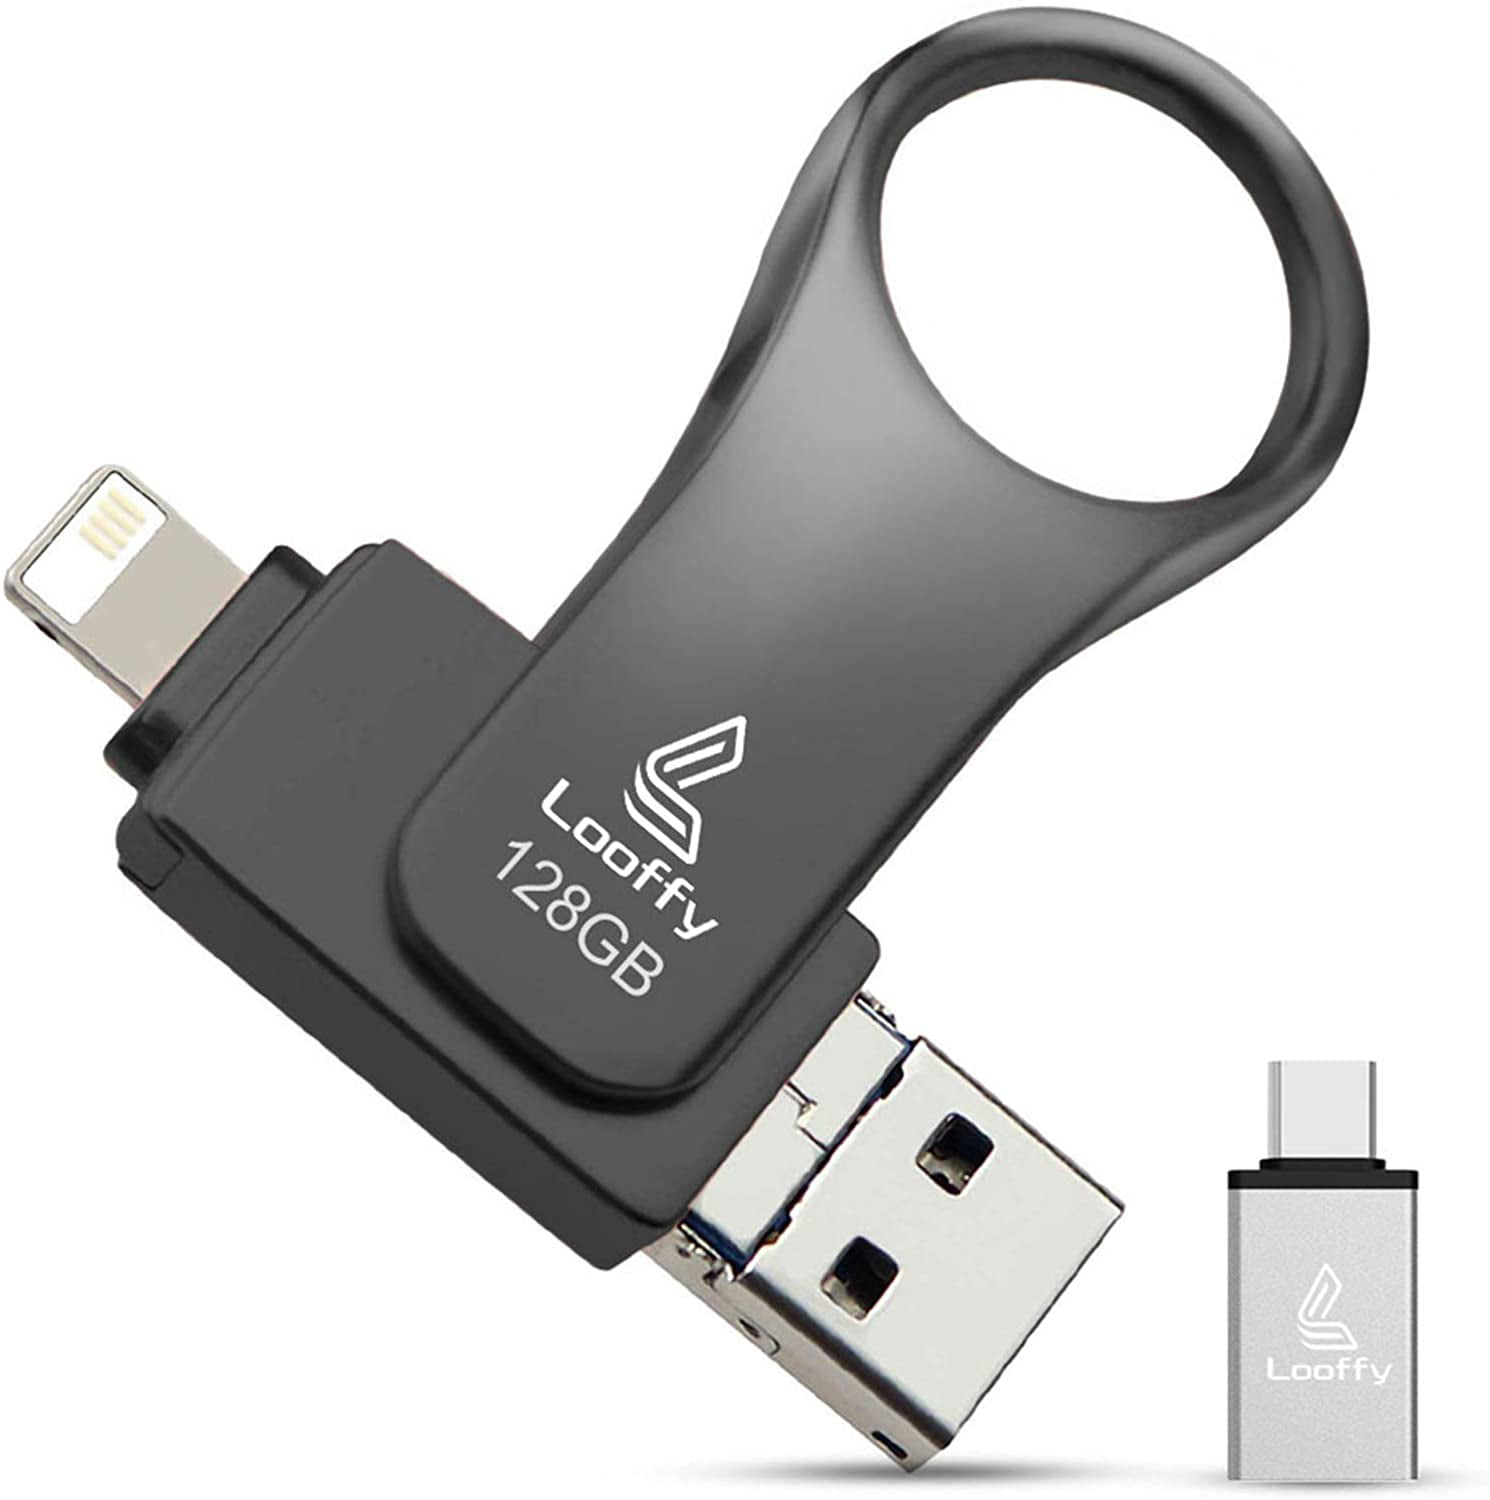 Black 128GB Usb Flash Drive for iPhone Photo Memory Stick Expansion Compatible for iPhone iPad Android Tablet PC and Devices with Micro USB 3.0/OTG/IOS/Type C 